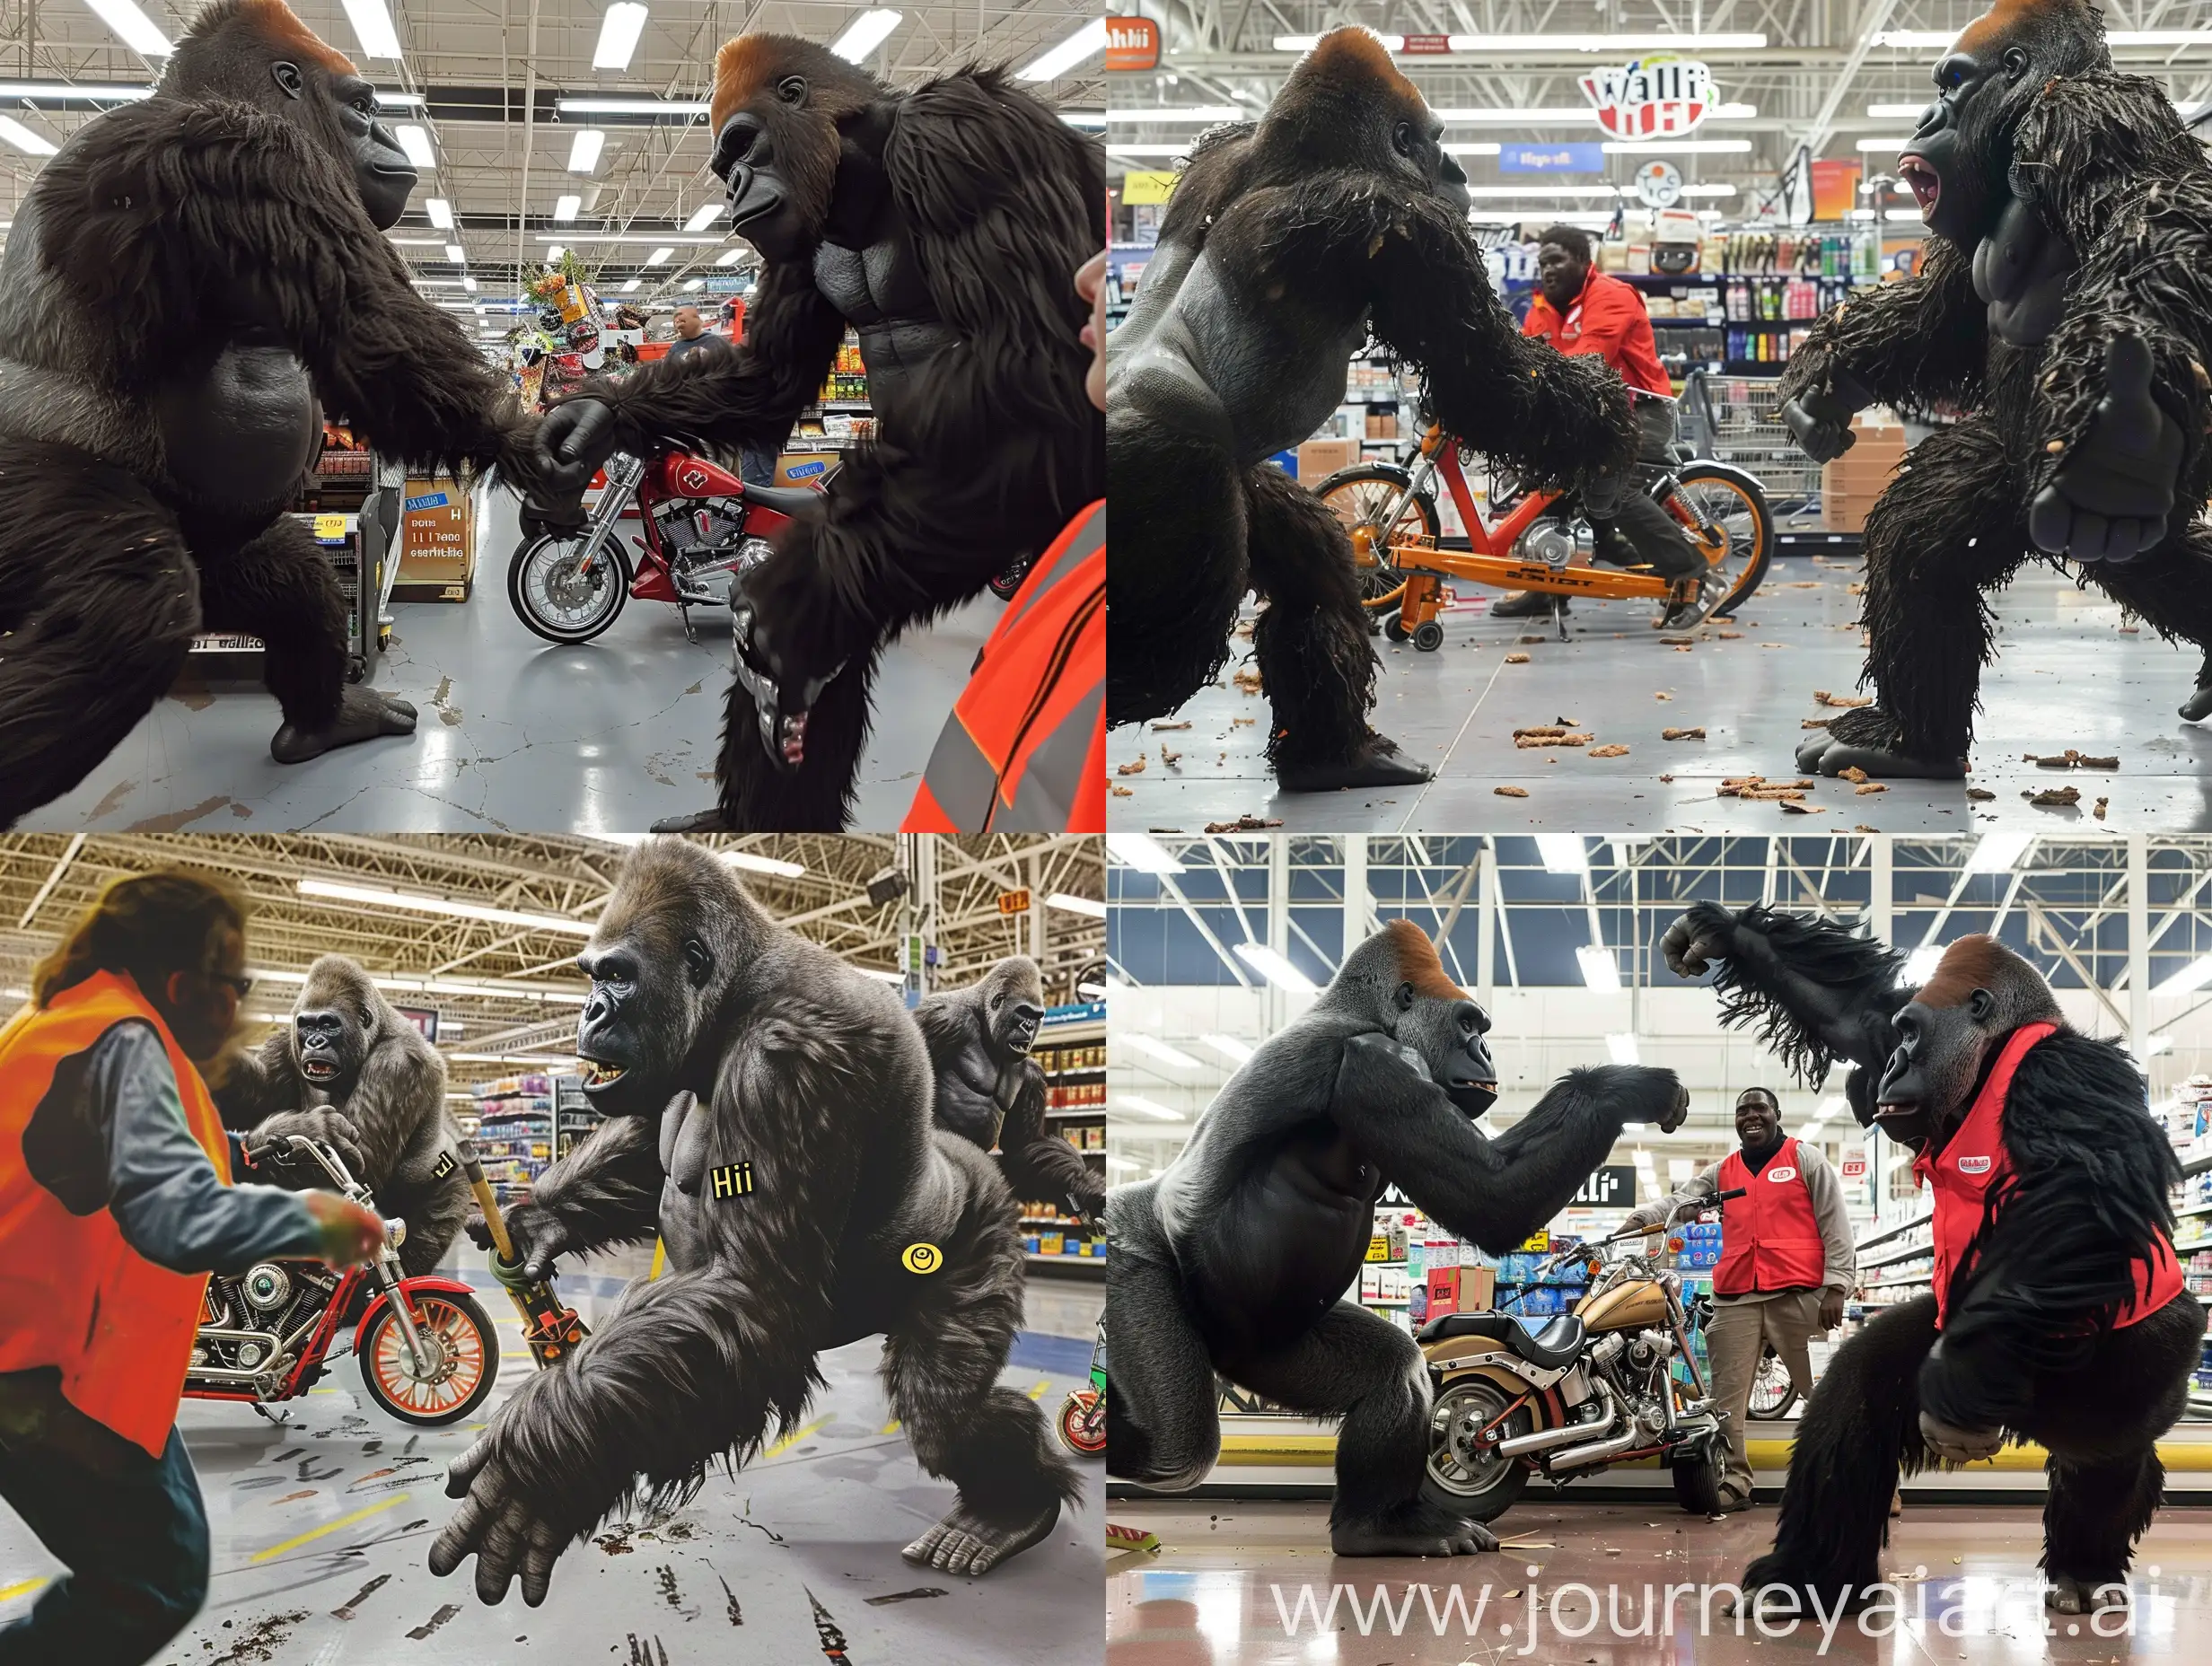 A chaotic scene inside a Walmart store, where a harried employee frantically tries to escape from a group of oversized gorillas. The apes, each wielding a junkyard scooter, have invaded the store, causing havoc and mayhem. The Walmart employee, identified by their red vest, desperately tries to flee the scene, only to find themselves trapped between two of the gorillas. In the background, an Amsterdam motorcycle, parked inside the store, can be seen, its distinctive orange and white coloring standing out against the disarray. A nearby customer, apparently trying to make light of the situation, has begun a humorous Snapchat conversation, with the message "Walmart meme when you're finished shopping" accompanied by a smiling emoji. The employee, overwhelmed by the absurdity of the situation, manages to send a brief reply: "Wahllhi I'm finshied 😂" - a humorous play on the Walmart name and the emoji for the word "finished." The Snapchat conversation serves as a comedic relief amidst the chaos, adding an unexpected layer of humor to the otherwise disastrous scenario.